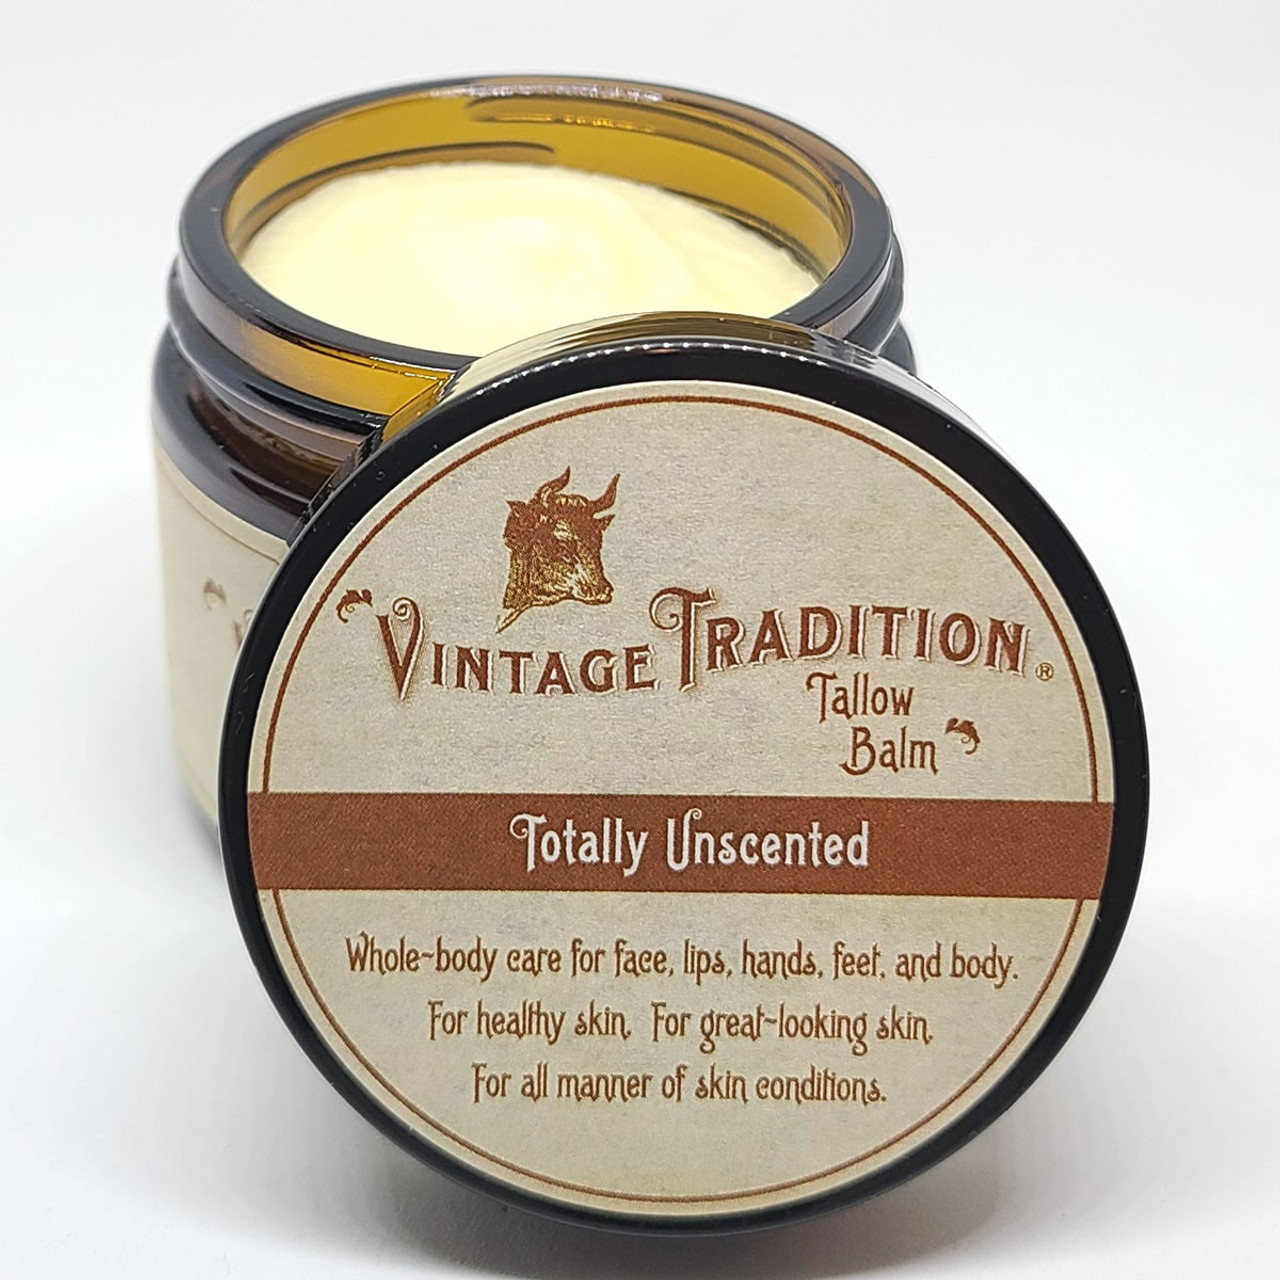 Vintage Tradition Totally Unscented Tallow Balm